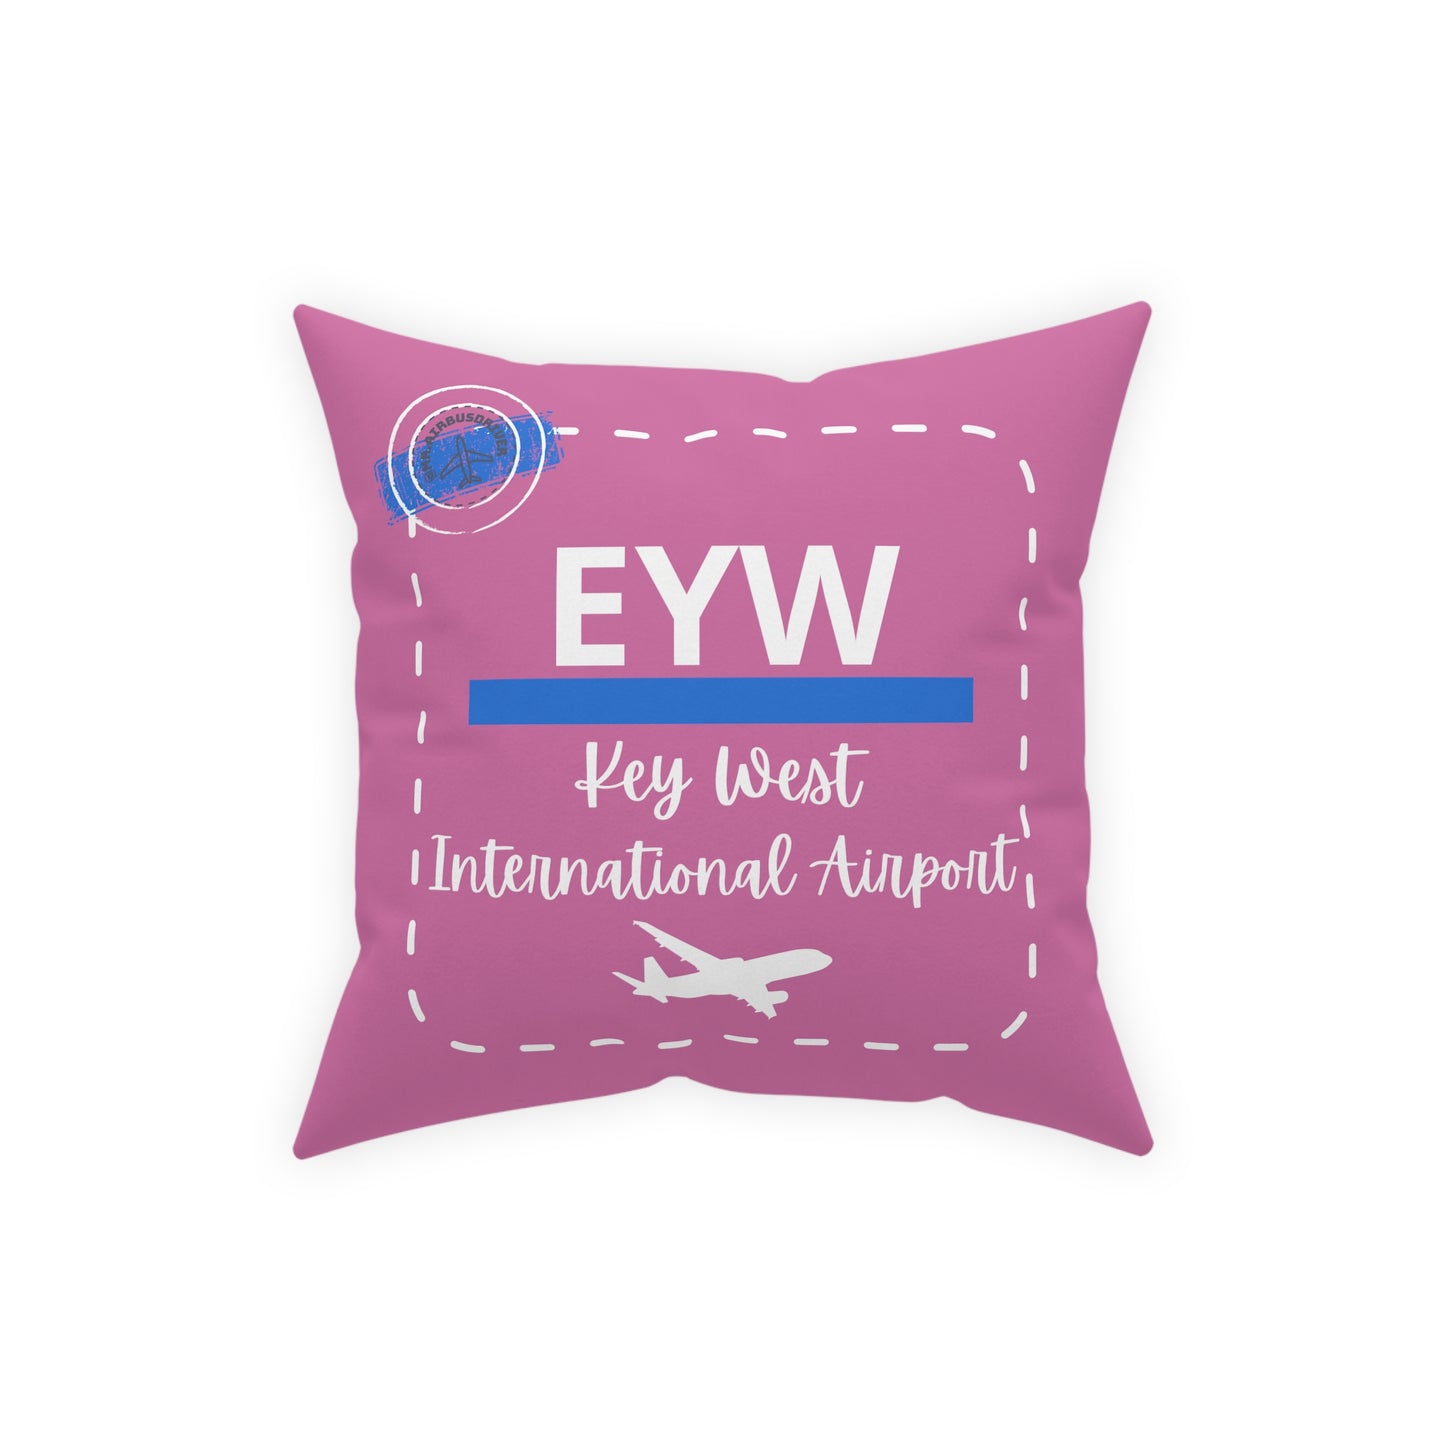 EYW Key West Airport Code Pillow Pink | Aviation Gift | Pilot Gift | Airline Crew and Aviation Worker Gift | Aviation Home Décor